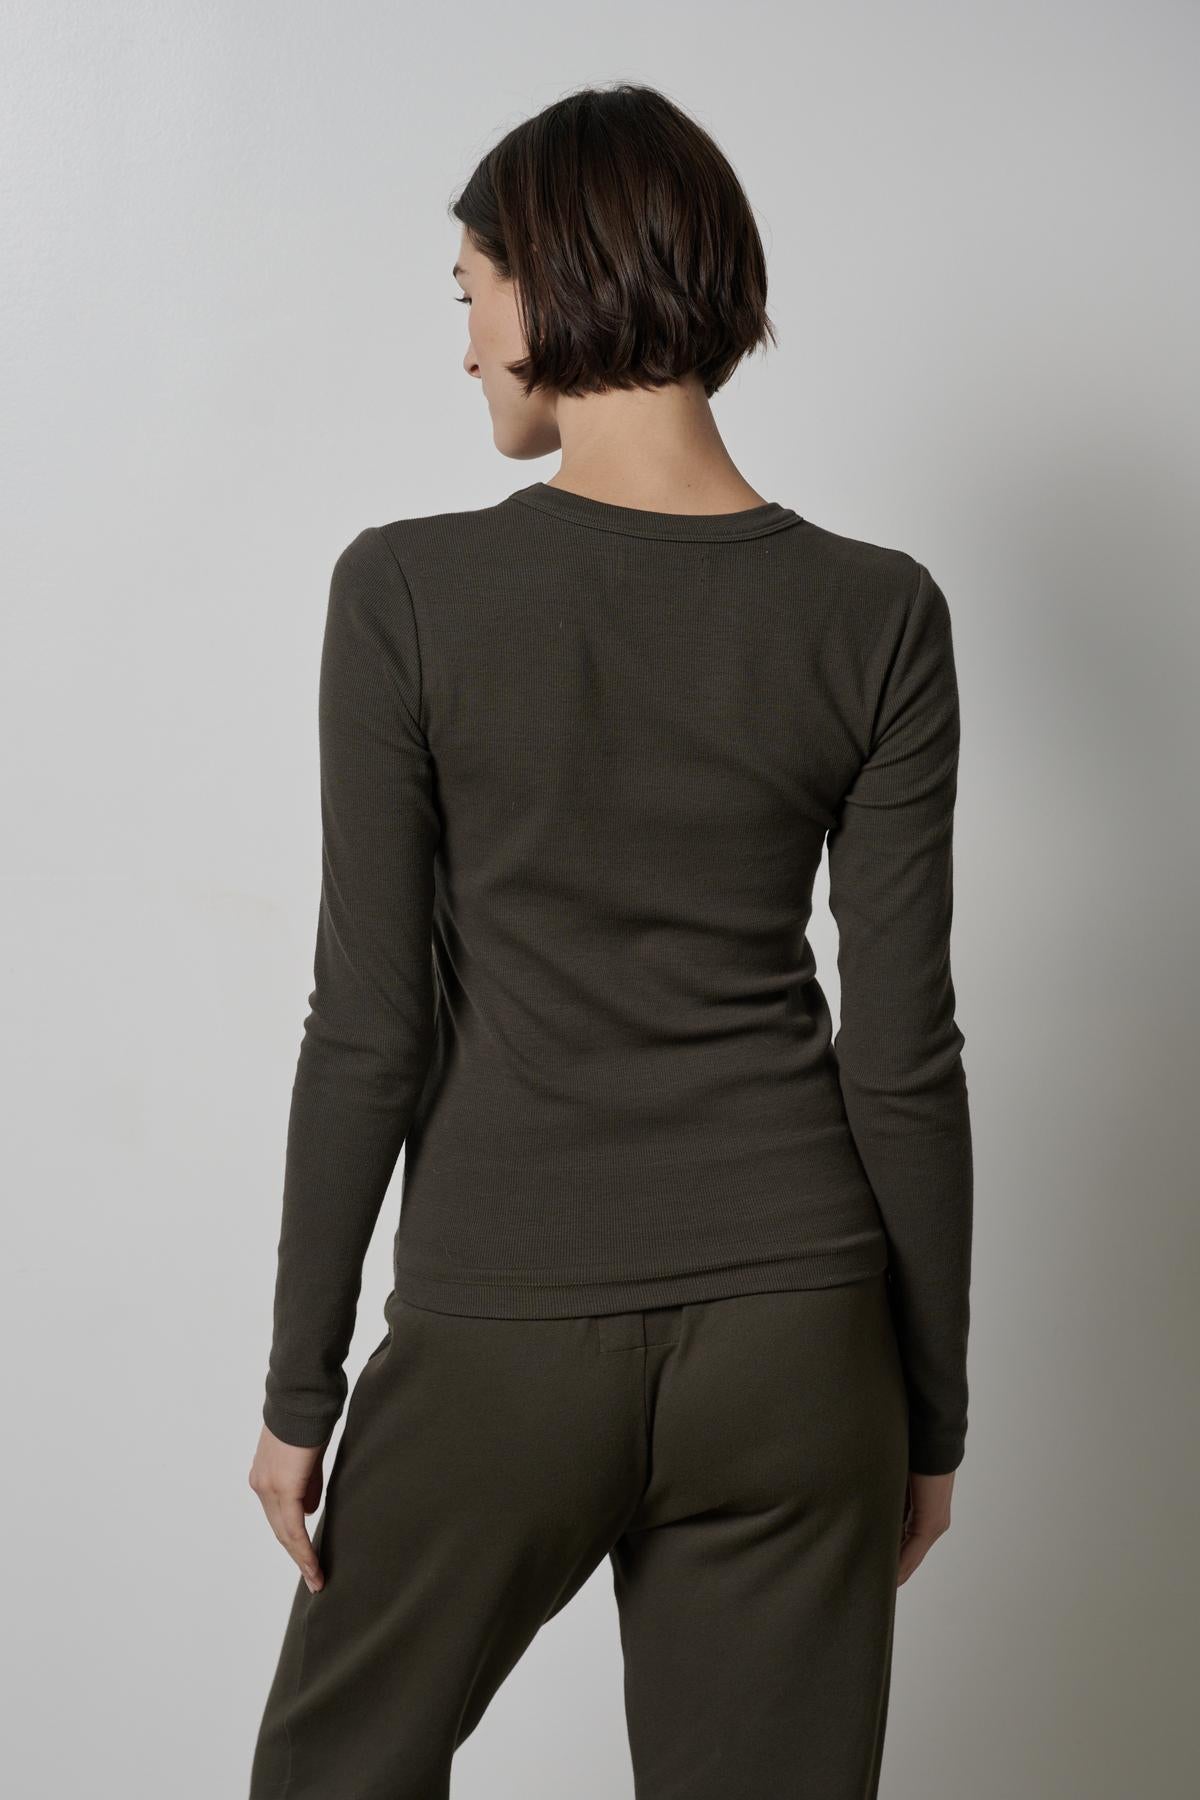 The back view of a woman wearing an Olive Camino Tee by Velvet by Jenny Graham.-26827706630337